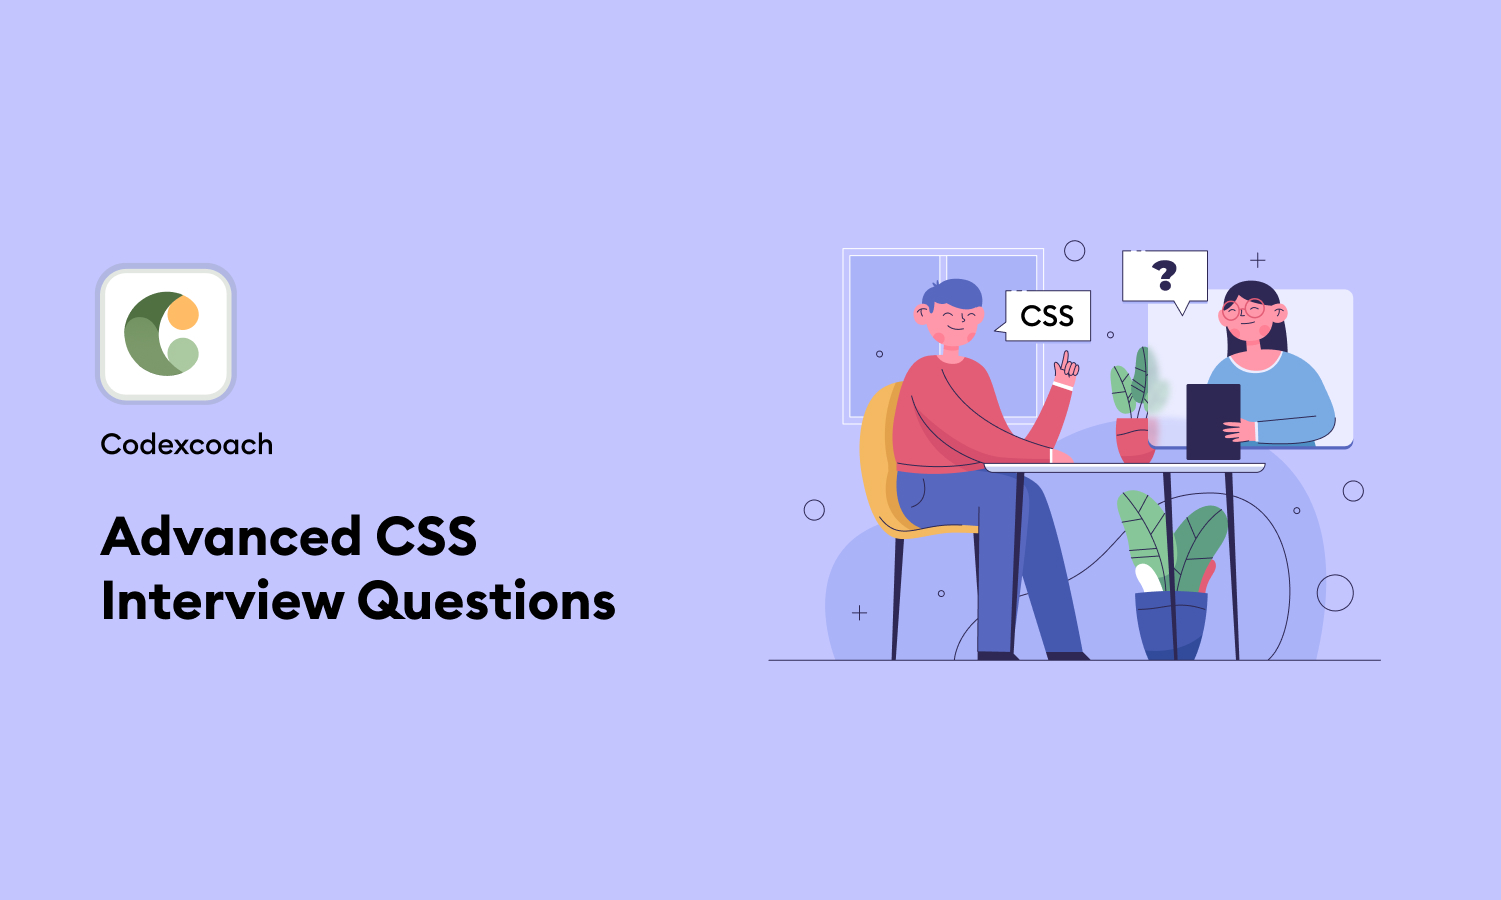 Advanced CSS Interview Questions